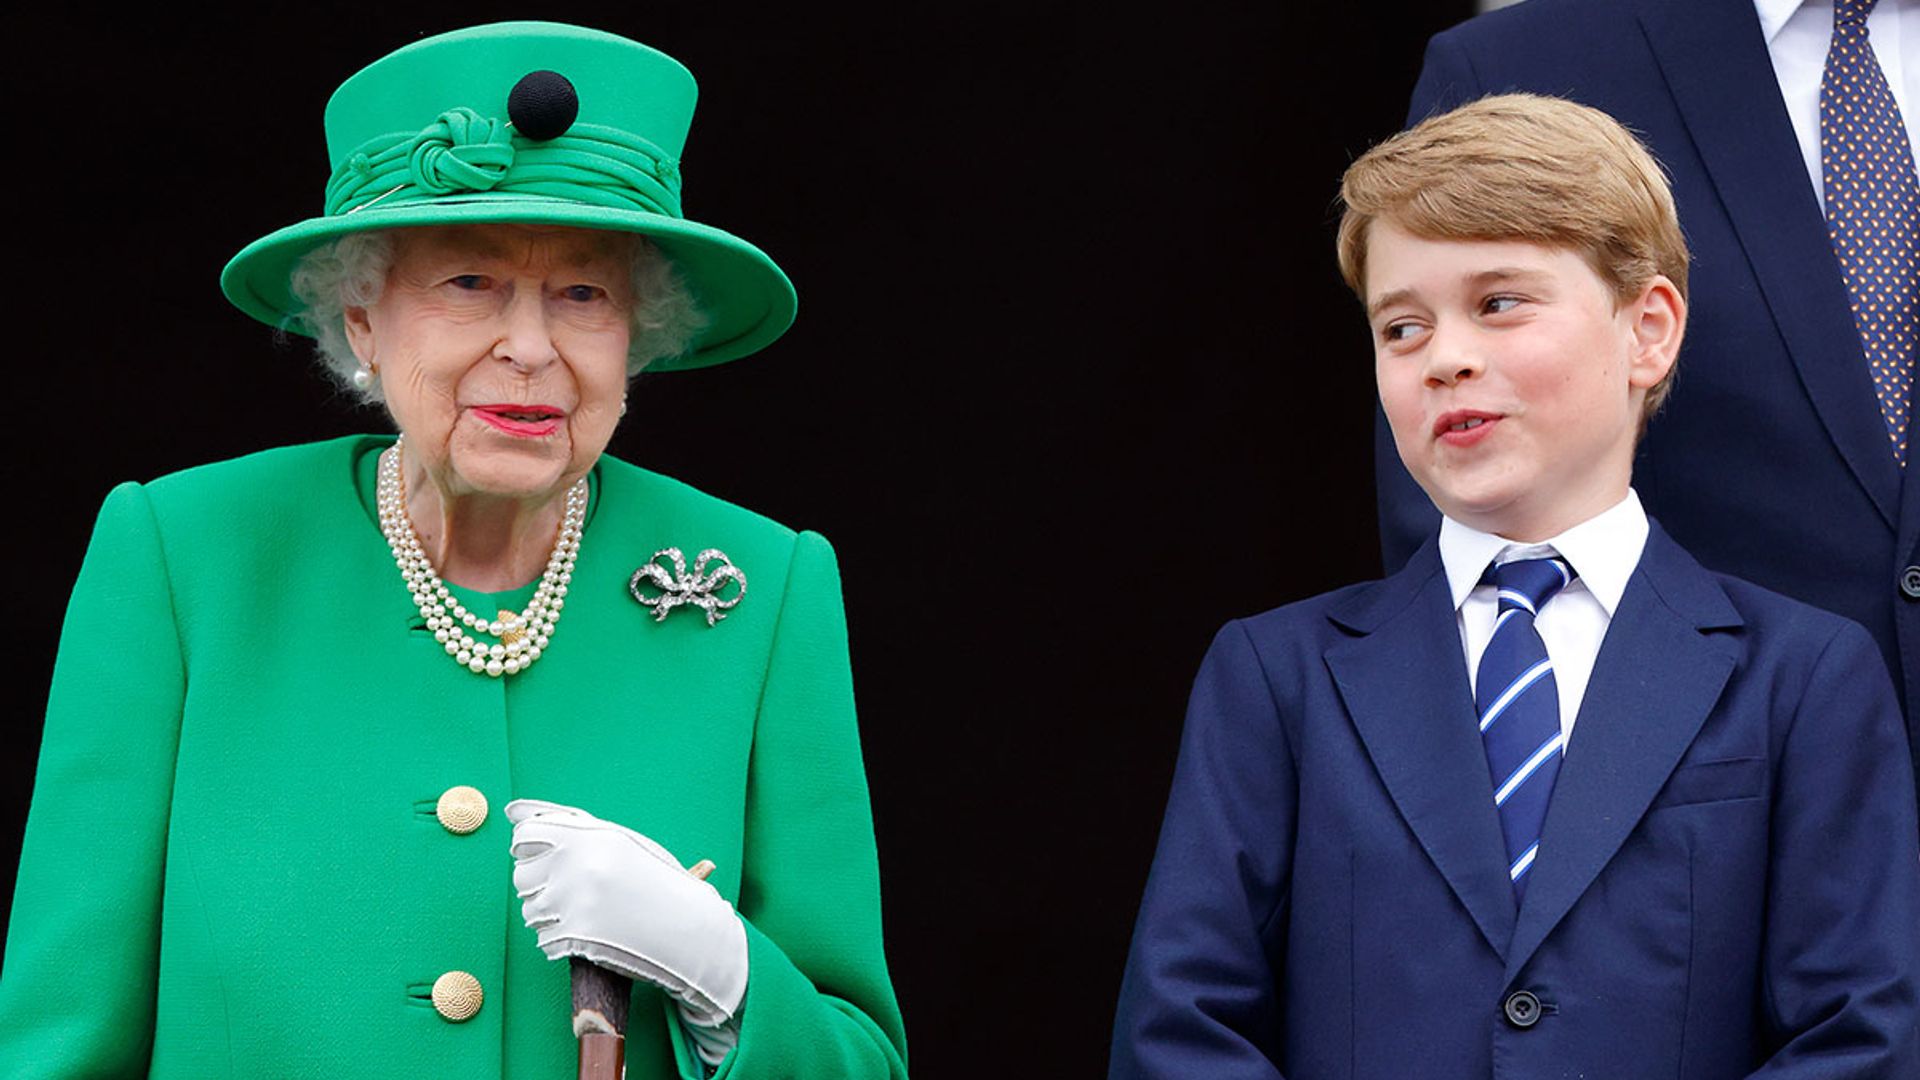 Why Prince George was positioned next to the Queen during final Platinum Jubilee balcony appearance